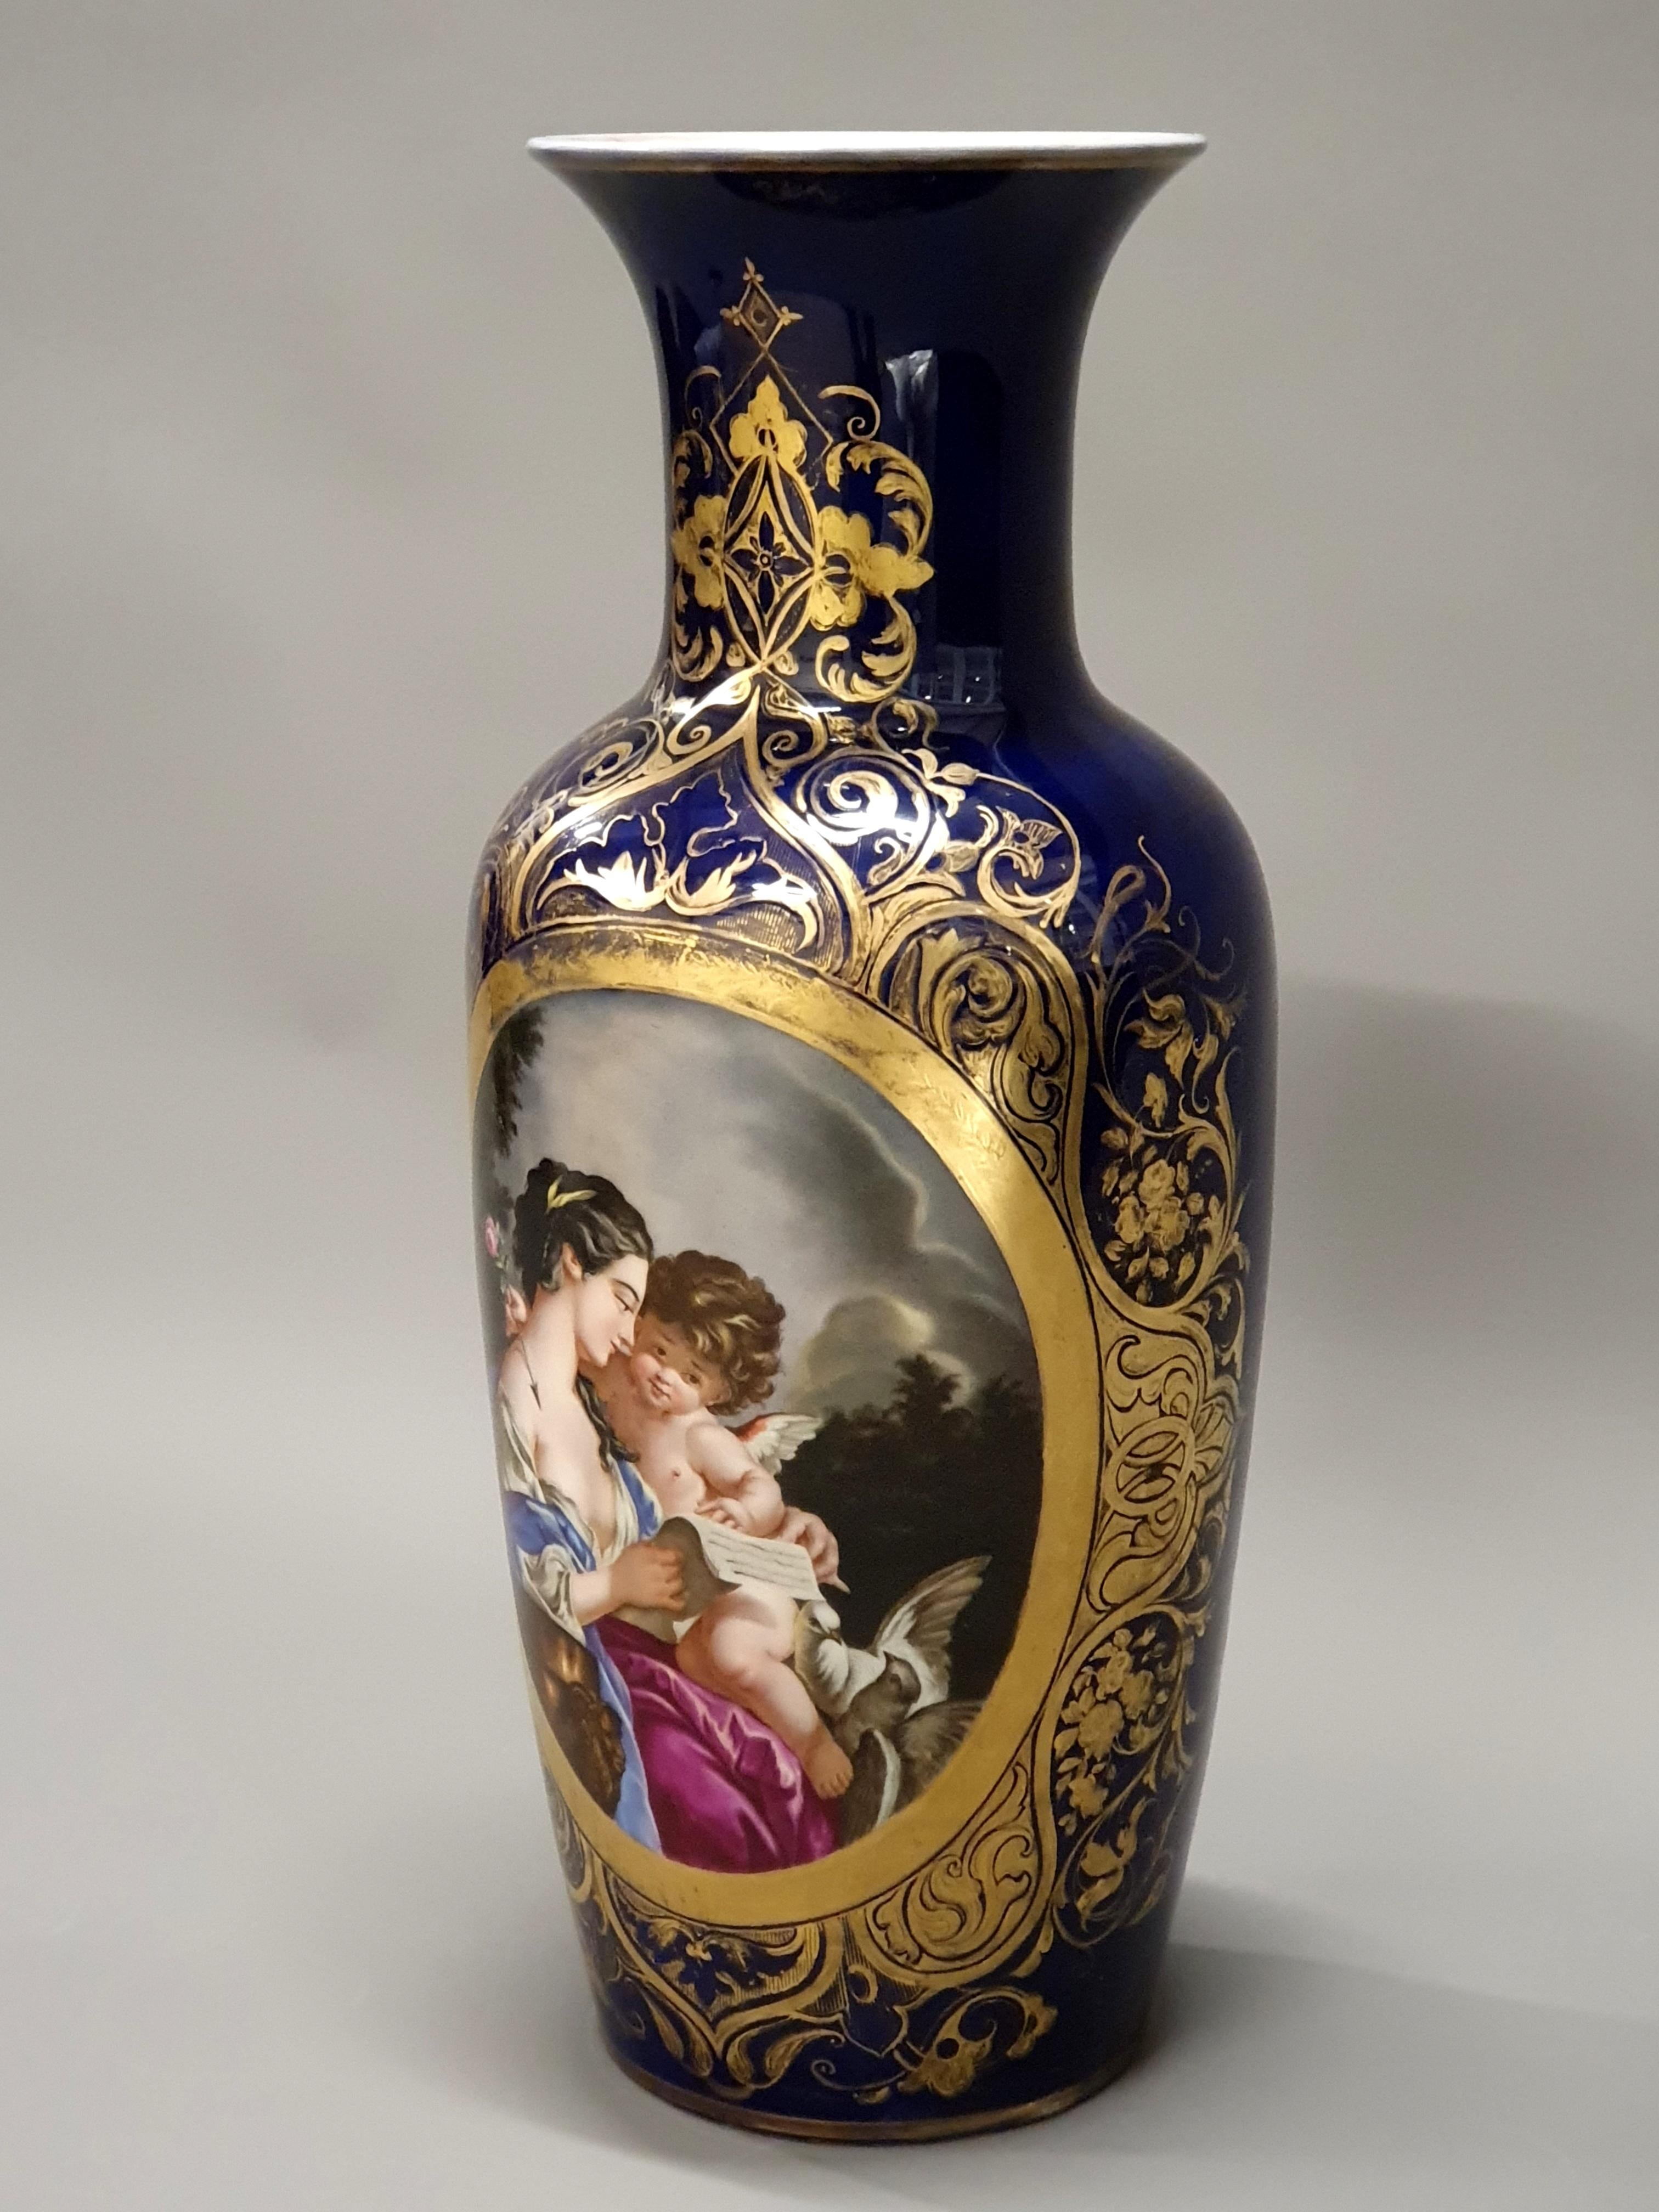 Large vase in fine Valentine porcelain in cobalt blue color and rich golden ornamentation of foliage and scrolls. Magnificent decor representing The Toilet of Venus after François Boucher, of exceptional quality and finesse.

Manufacture de